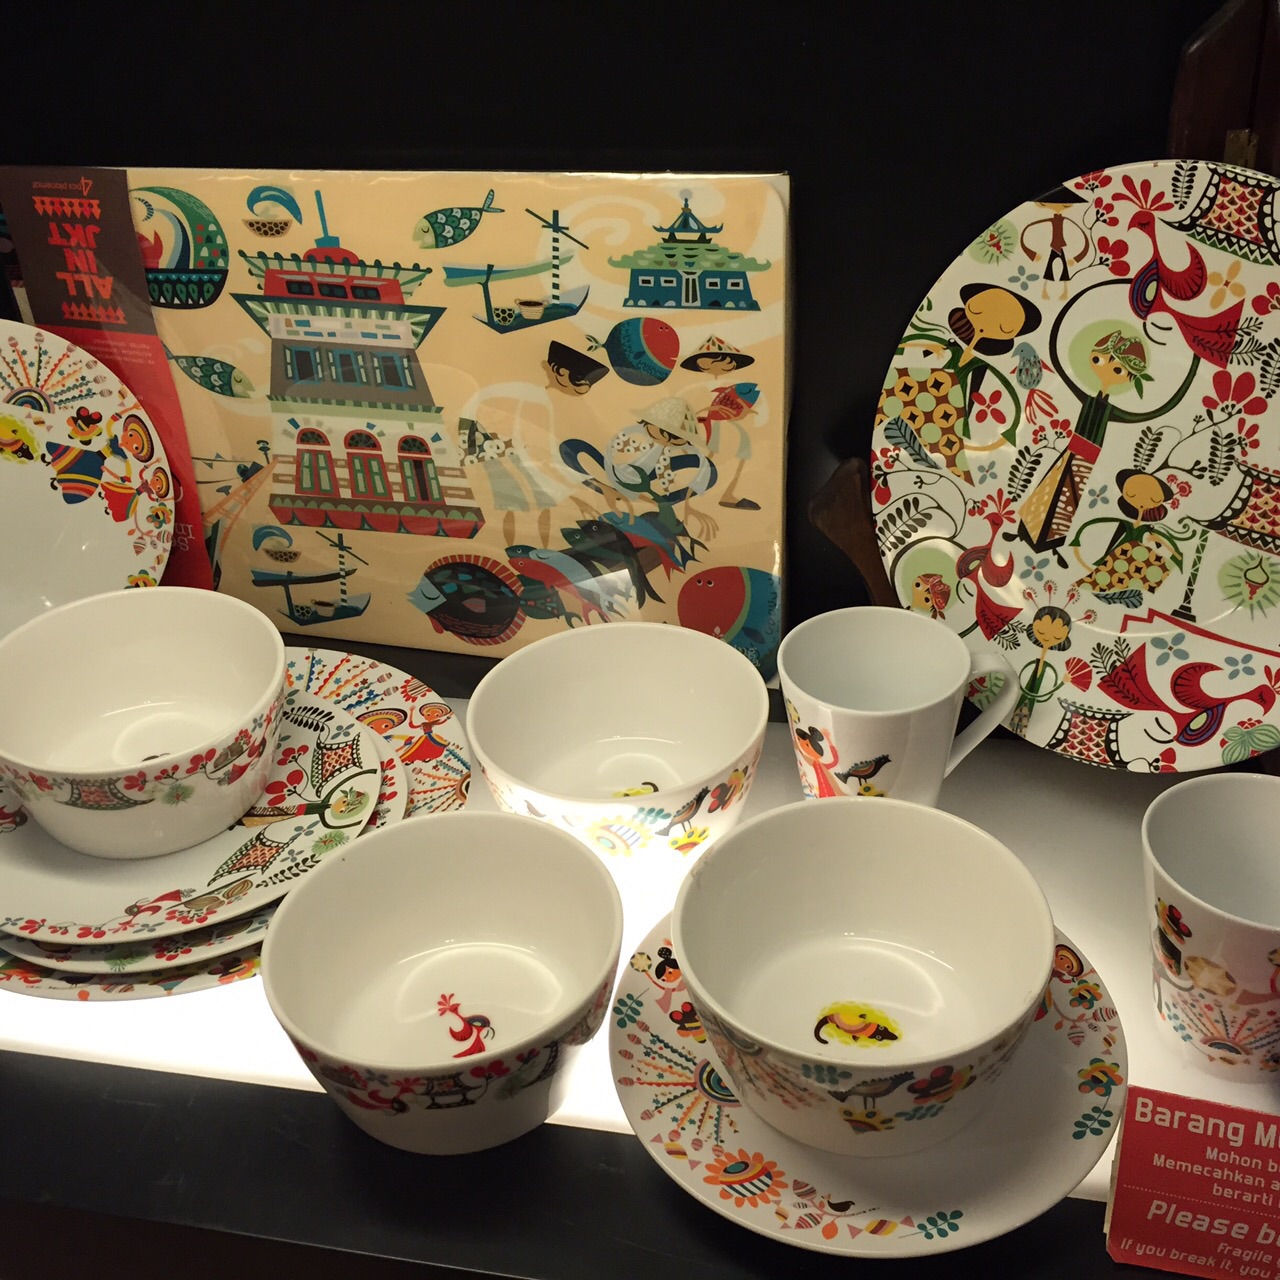 a display of decorative dishes and plates in a display